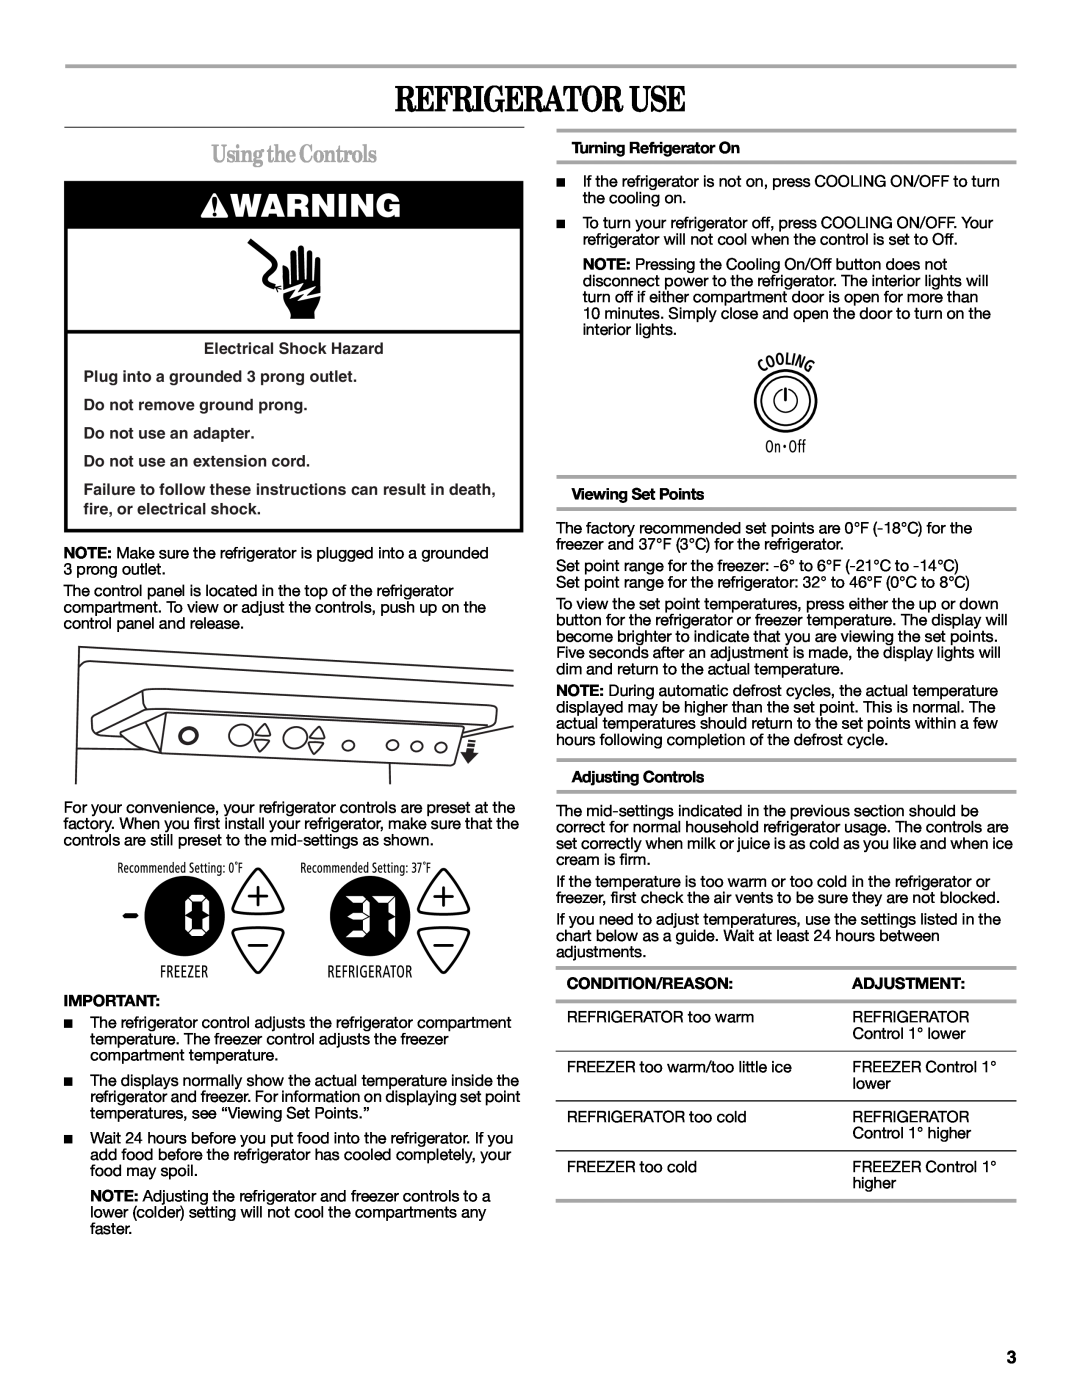 Whirlpool KSBS23INBT00 Refrigerator Use, UsingtheControls, Electrical Shock Hazard Plug into a grounded 3 prong outlet 